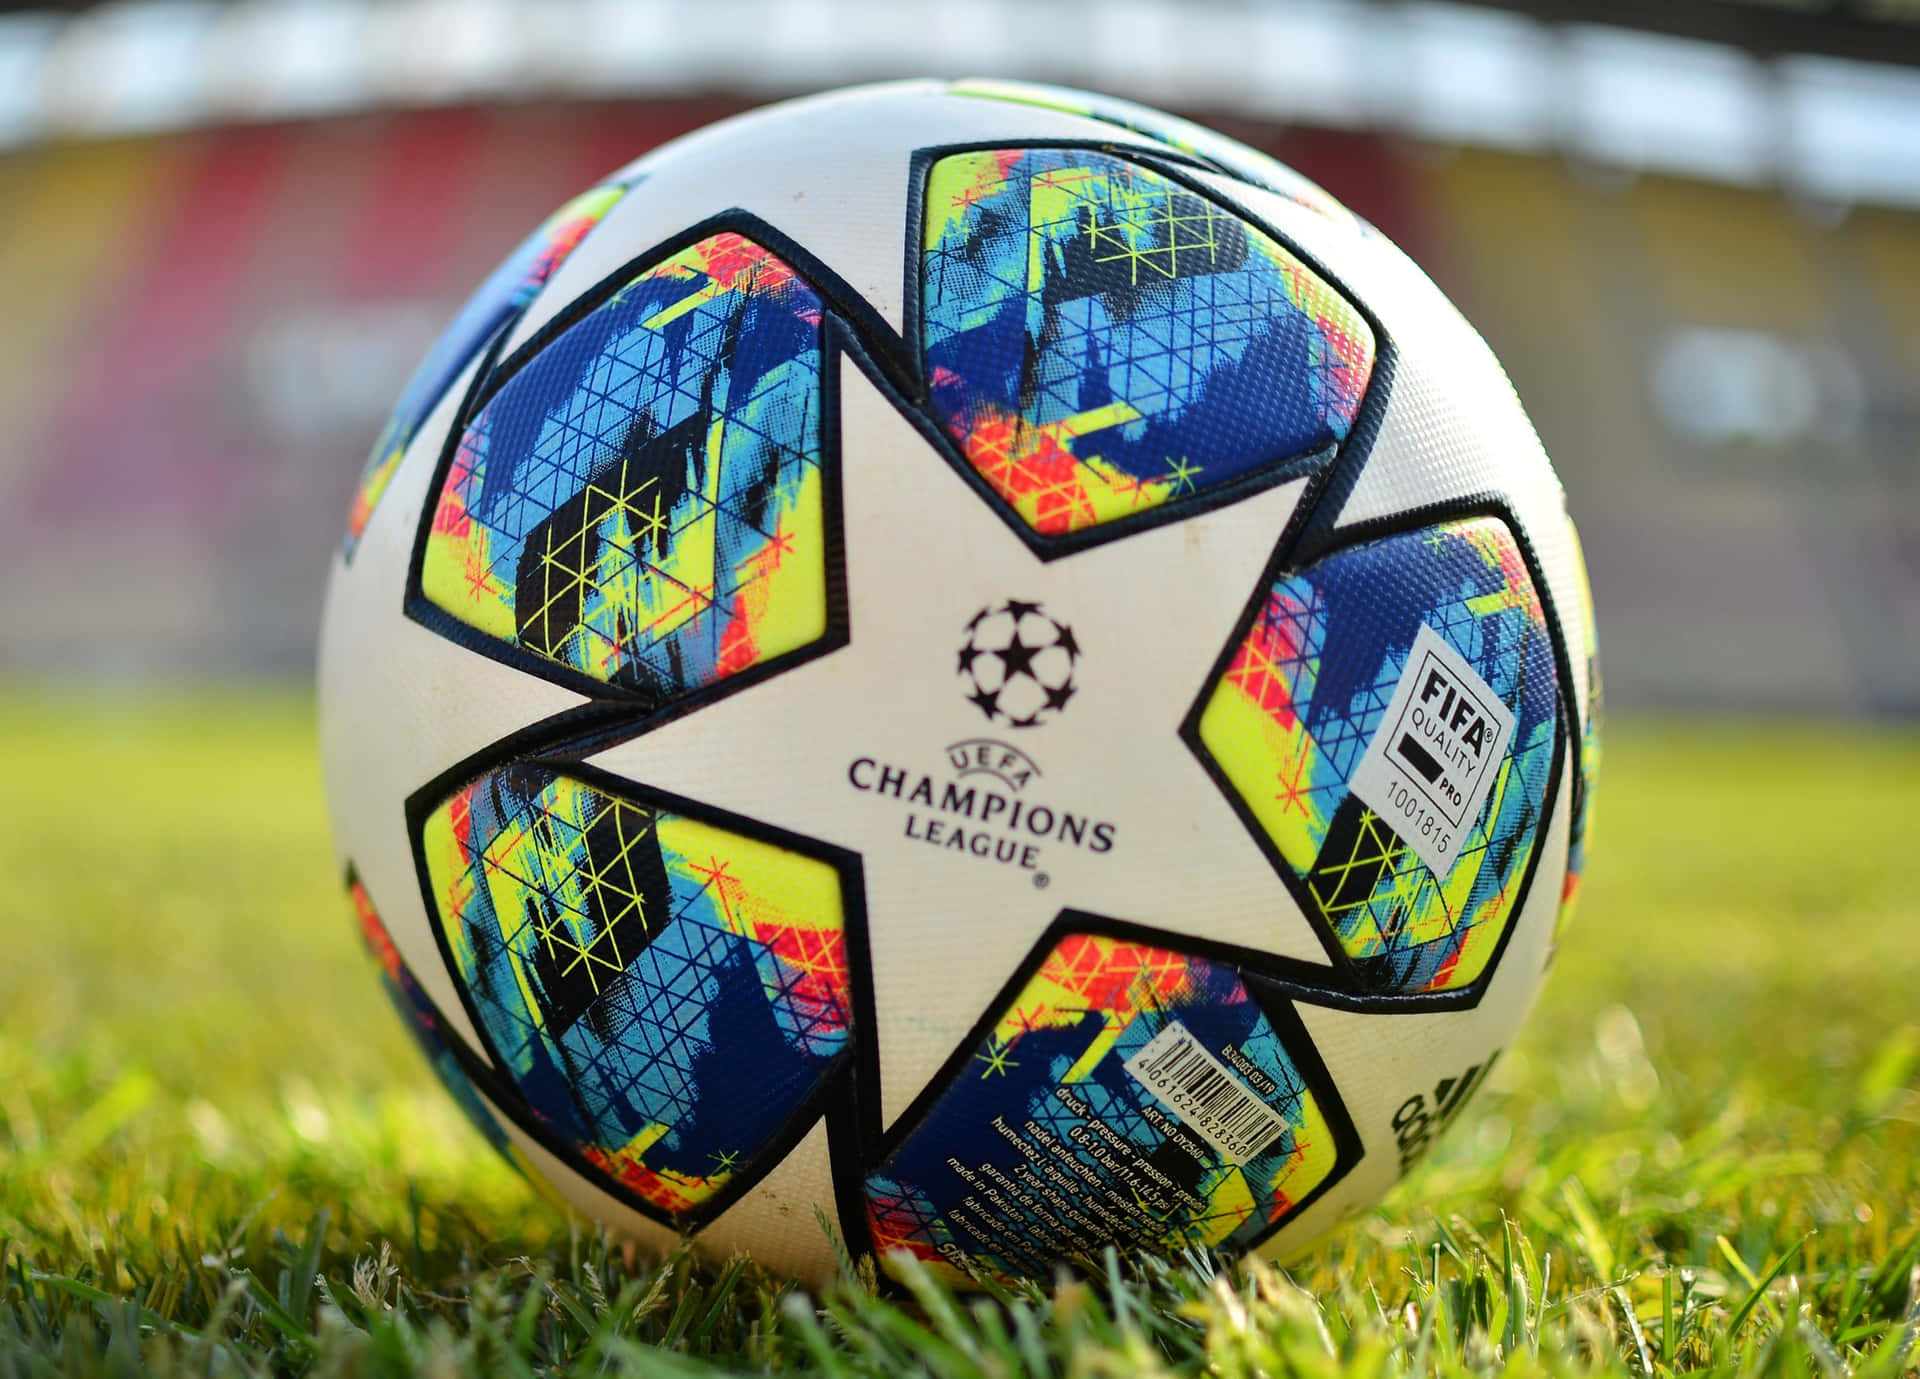 A soccer ball ready to get kicked onto the pitch!